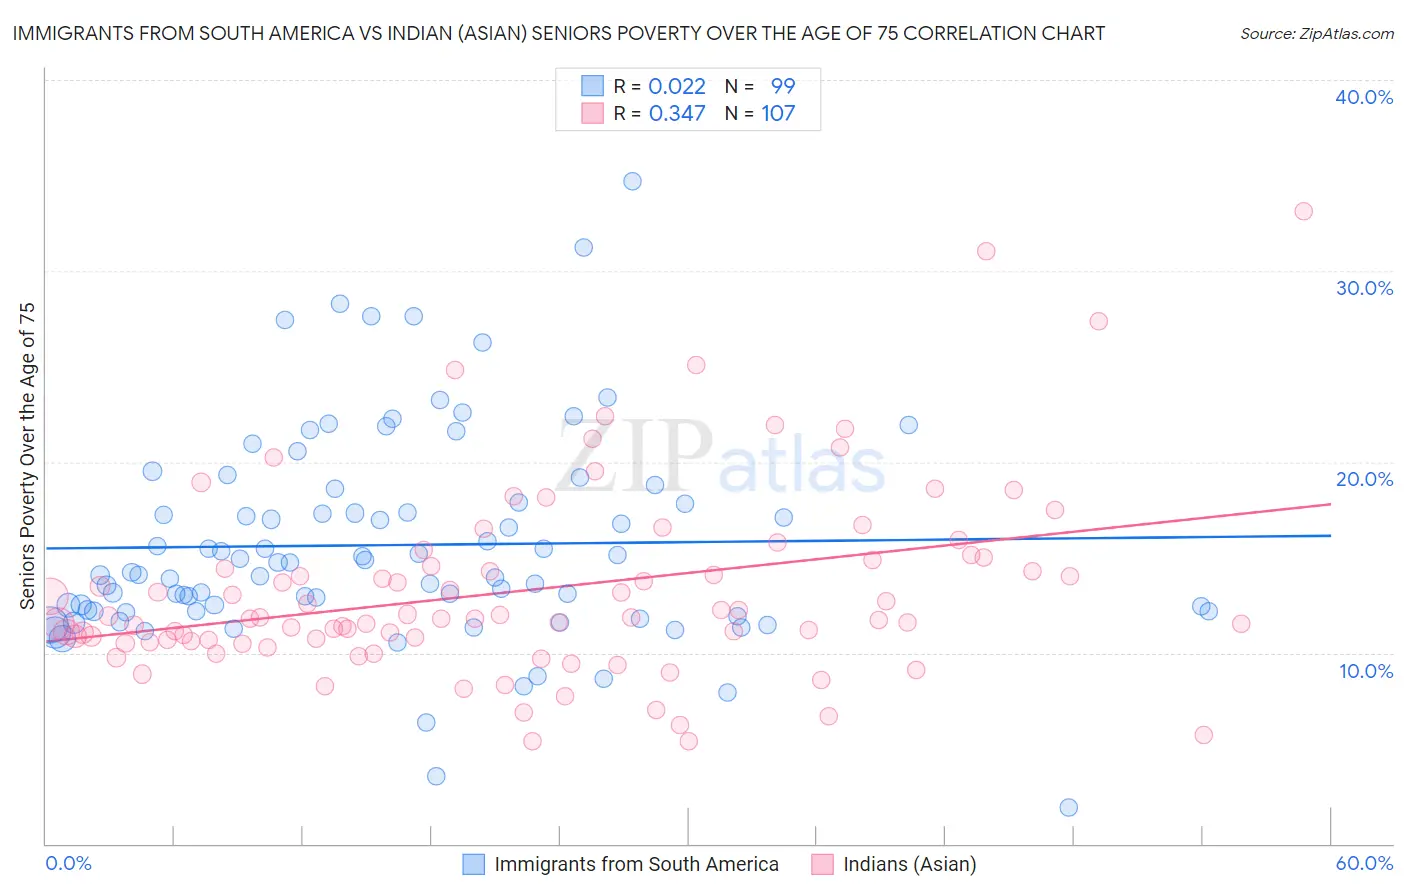 Immigrants from South America vs Indian (Asian) Seniors Poverty Over the Age of 75